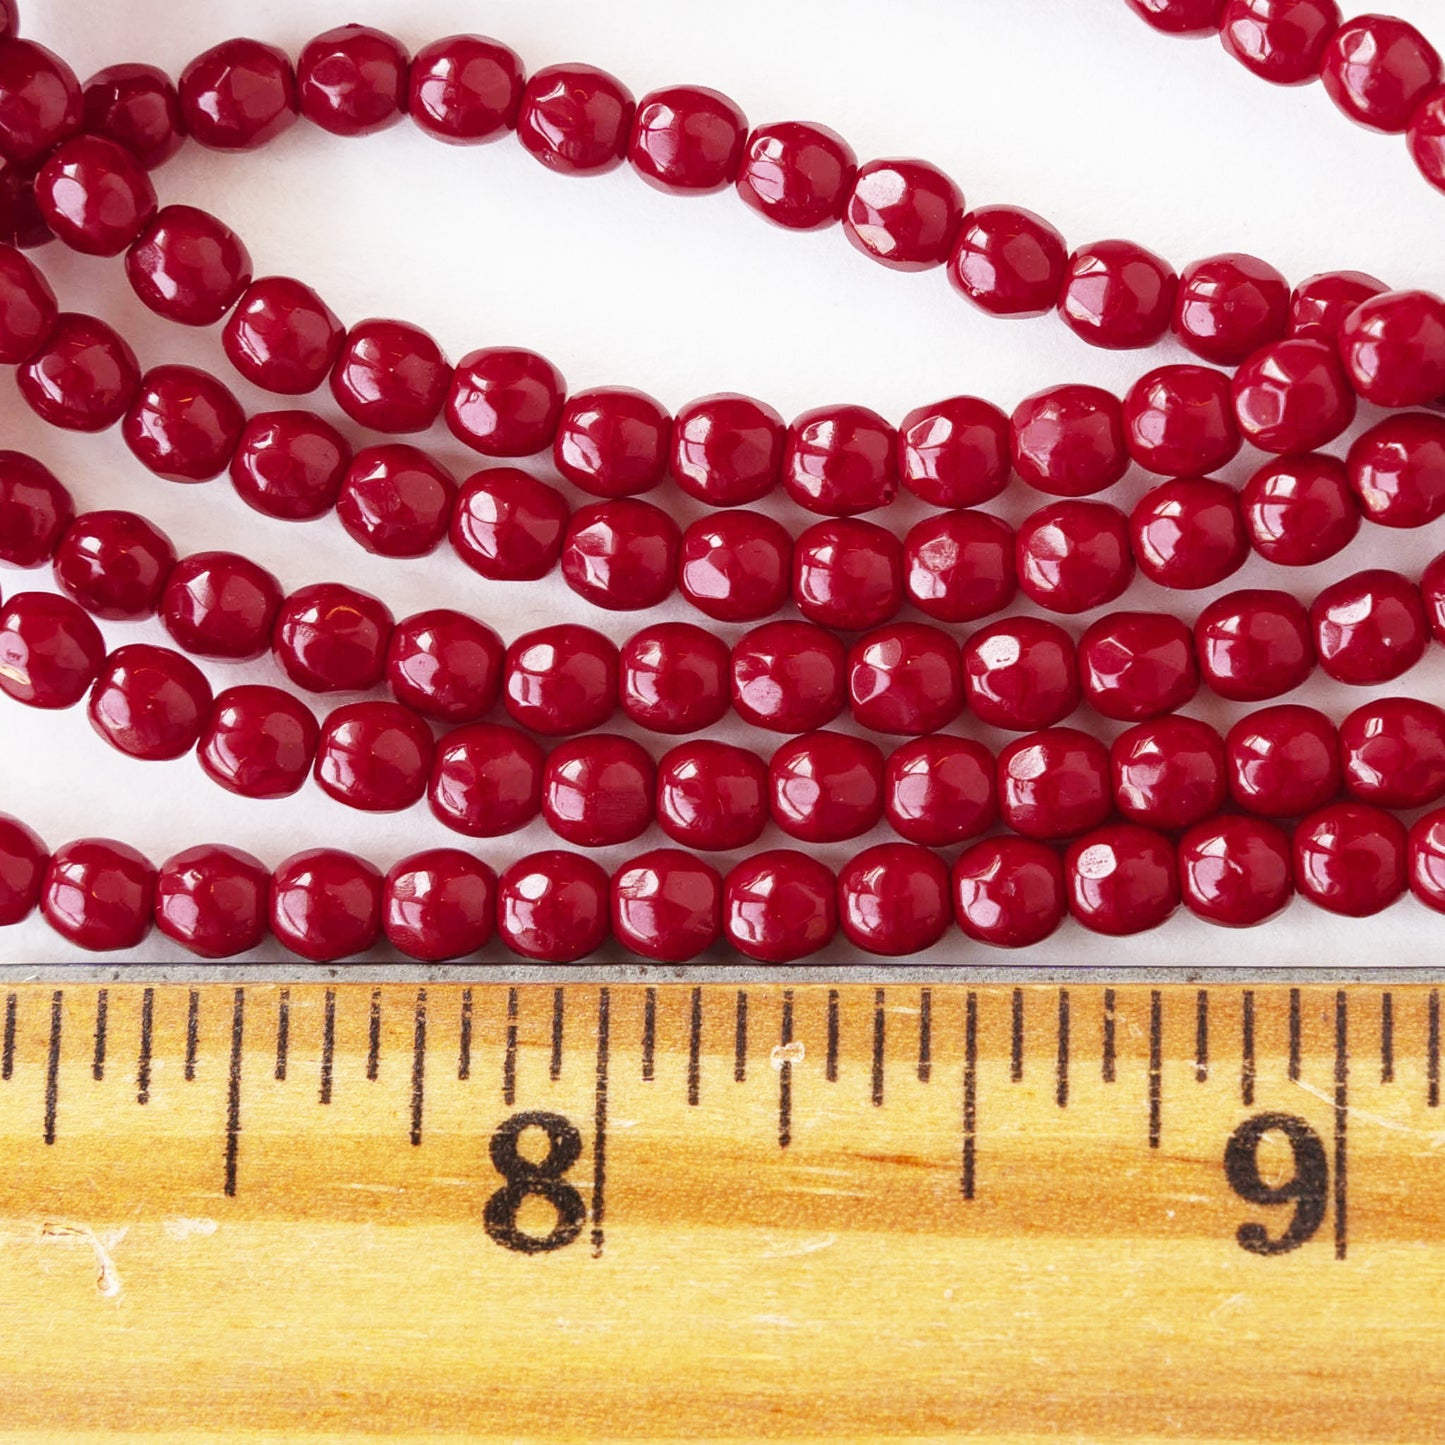 4mm Faceted Round Beads - Opaque Red - 50 beads